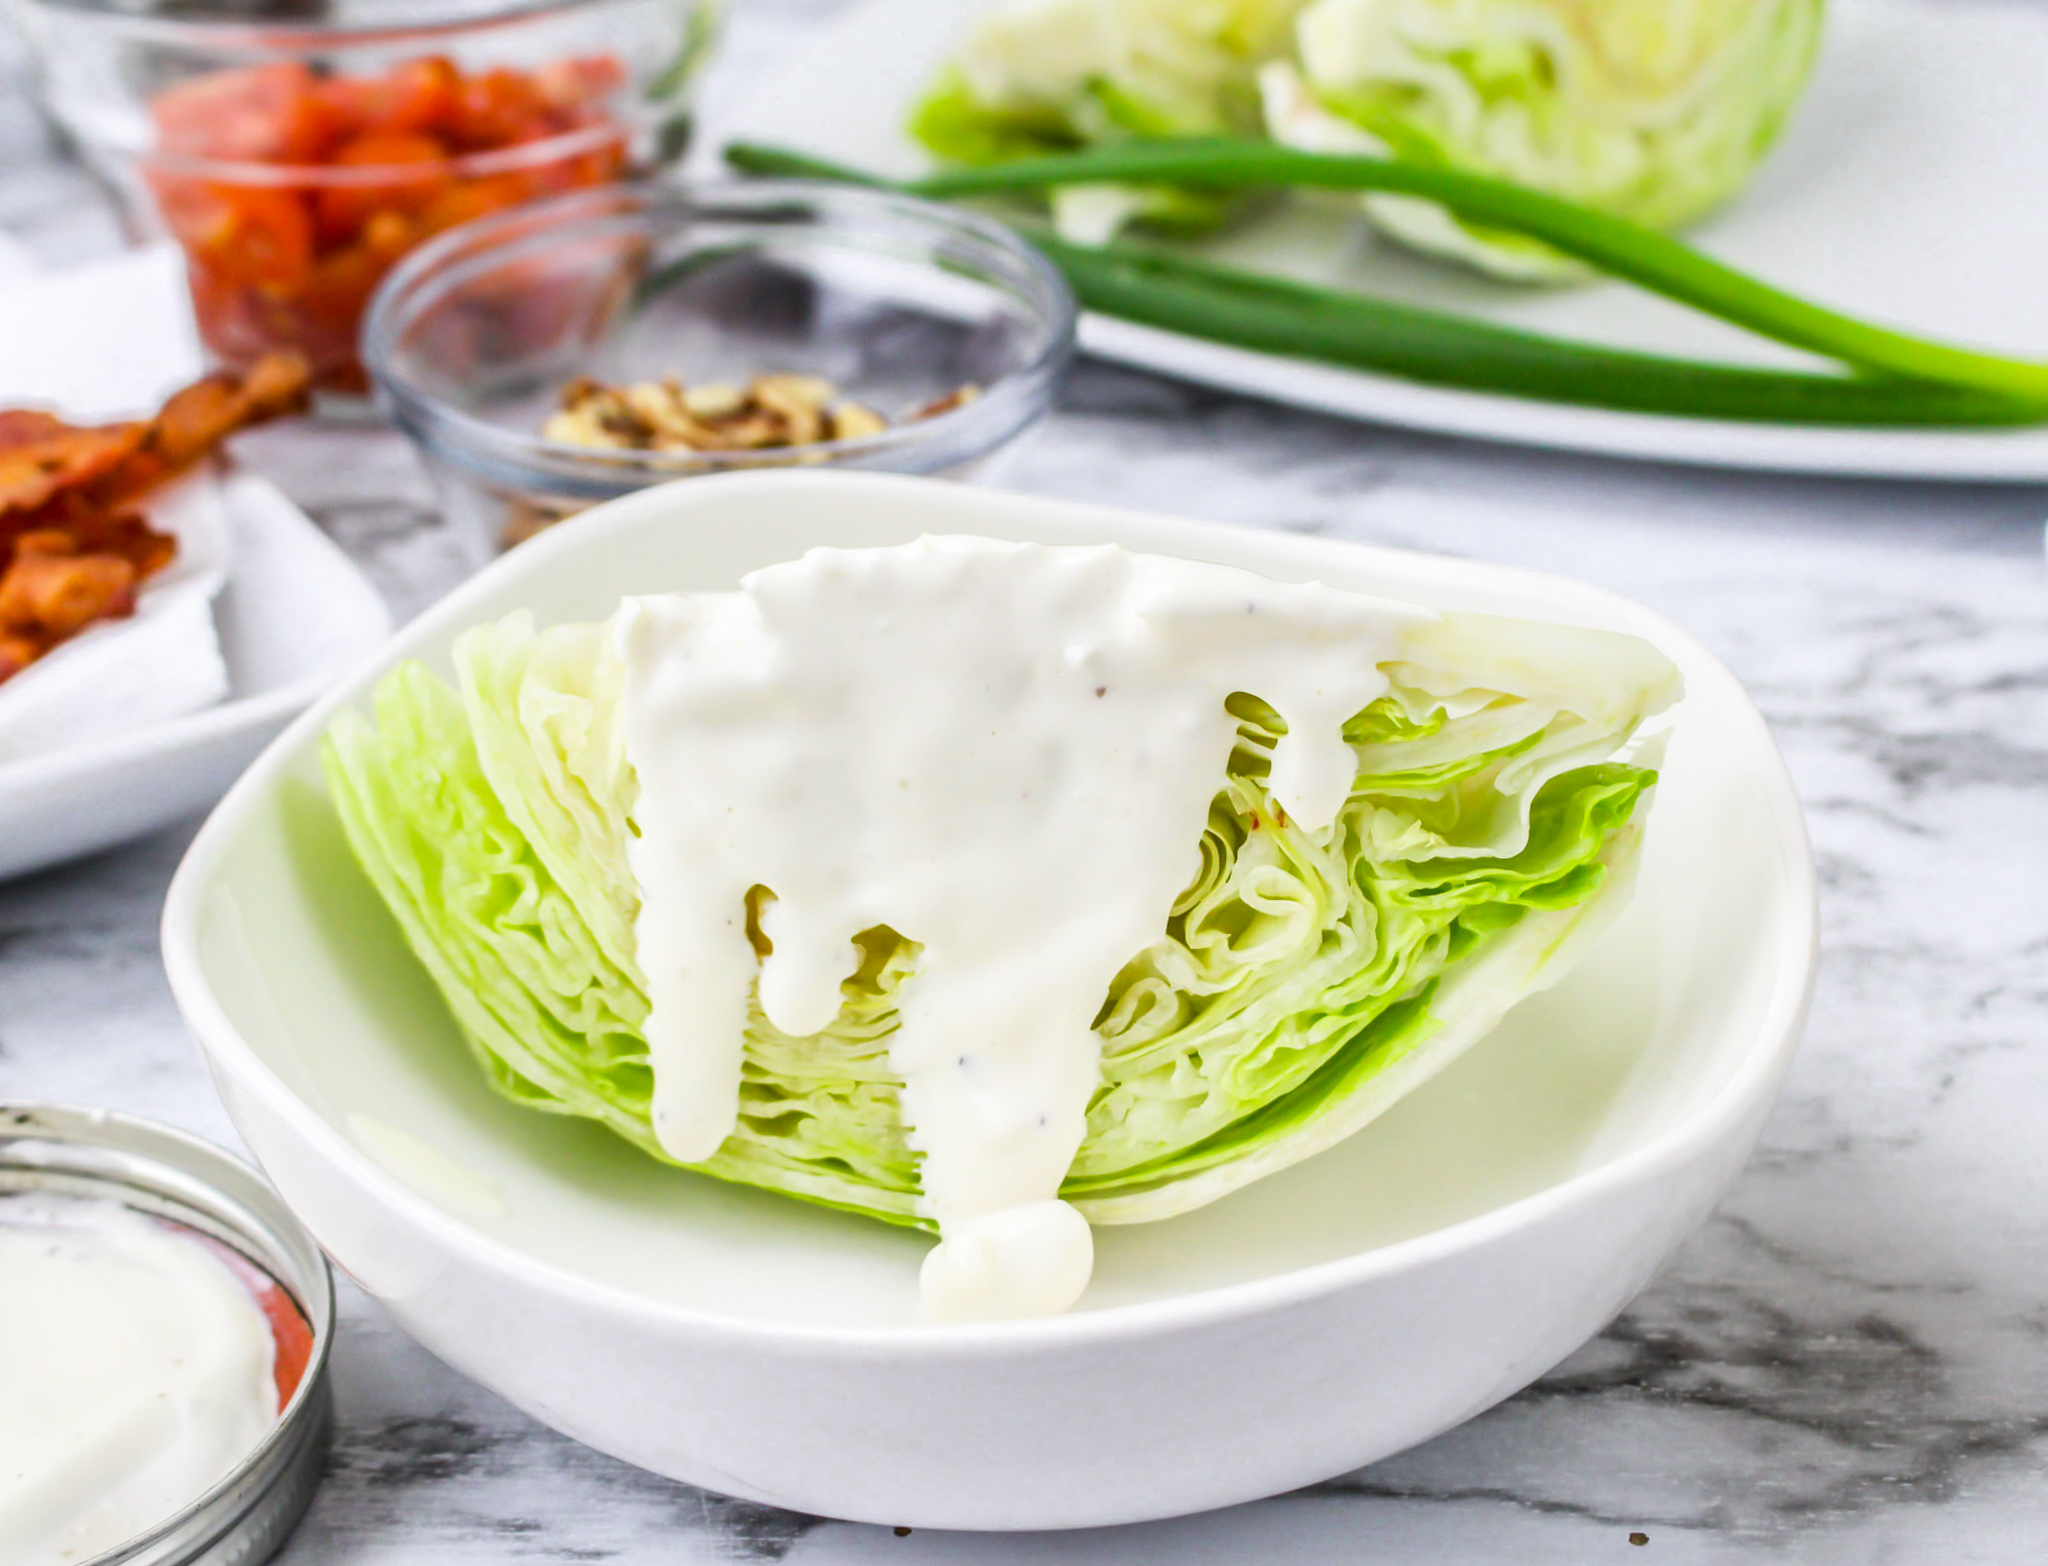 wedge of lettuce drizzled with white dressing